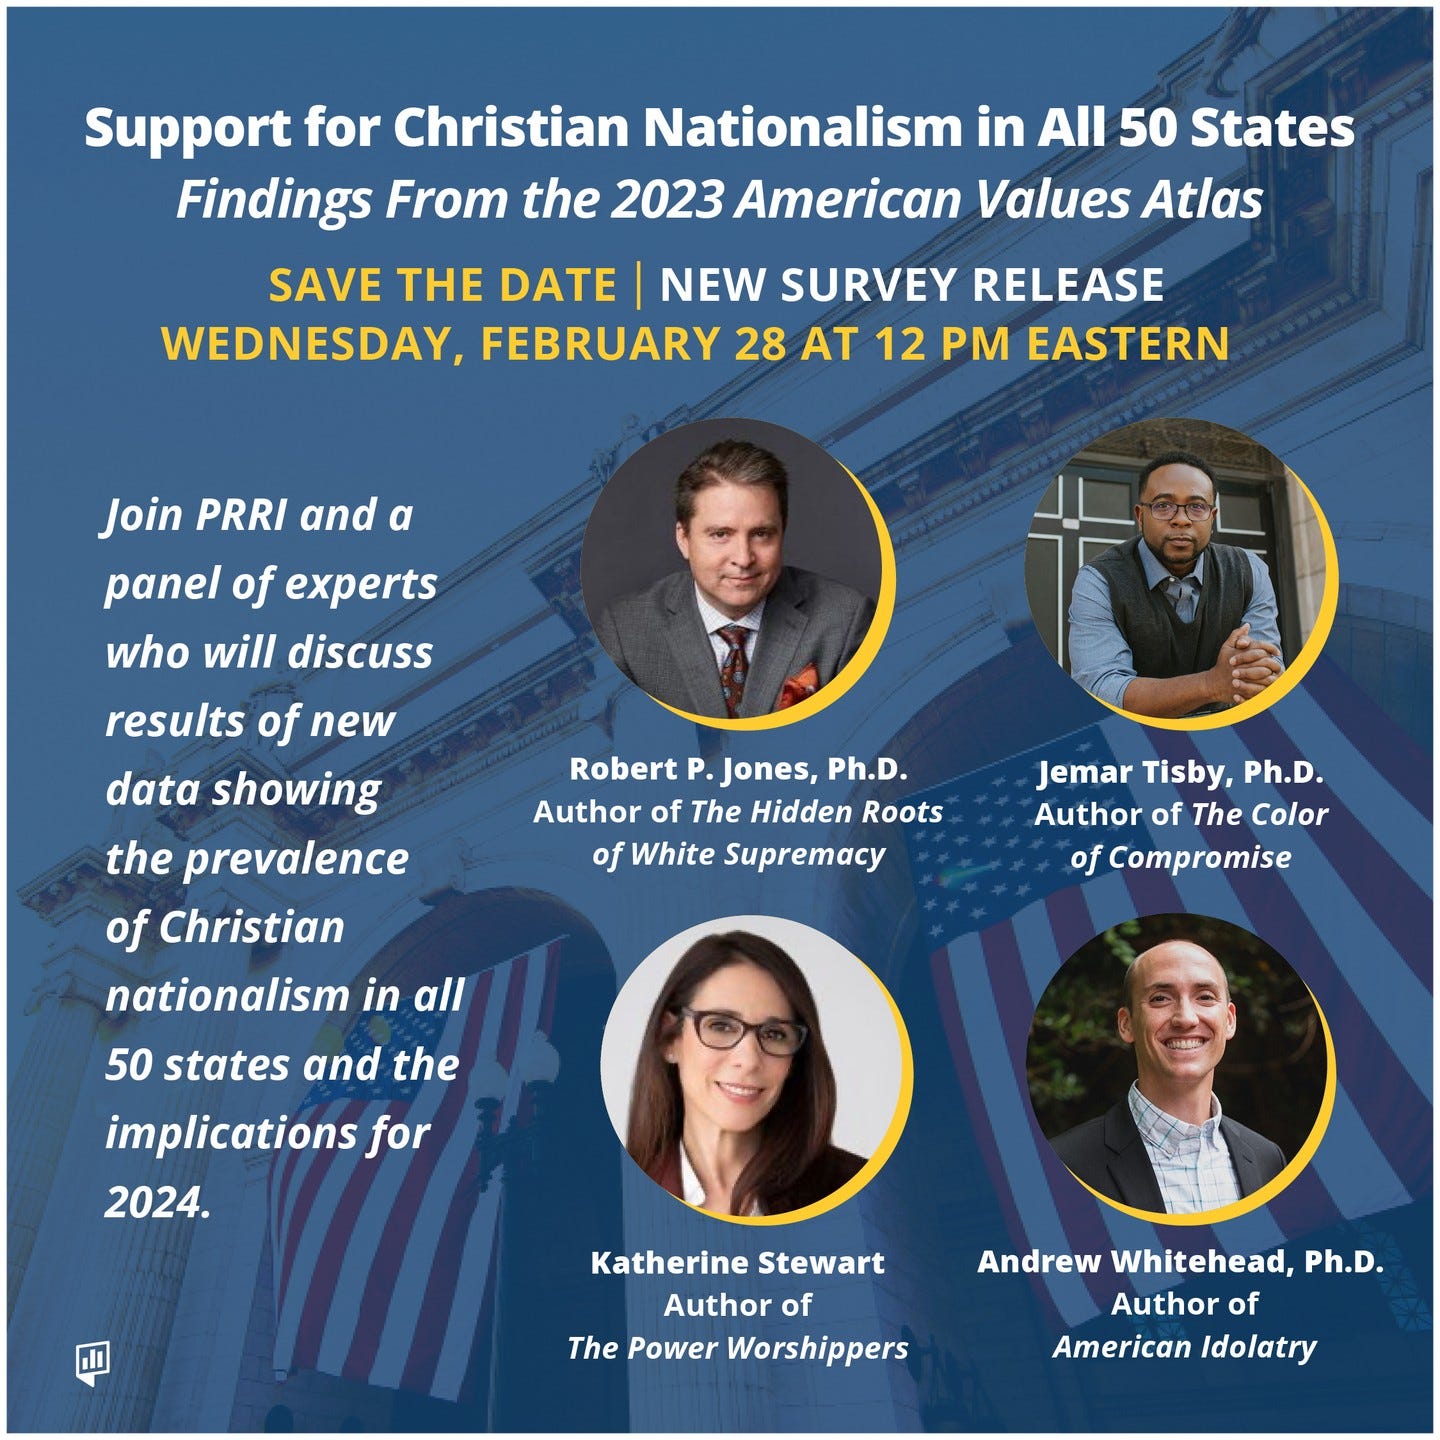 Photo by PRRI (Public Religion Research Institute) on February 27, 2024. May be an image of 4 people, poster, magazine and text that says 'Support for Christian Nationalism in All 50 States Findings From the 2023 American Values Atlas SAVE THE DATE NEW SURVEY RELEASE WEDNESDAY, FEBRUARY 28 AT 12 PM EASTERN Join PRRI and a panel of experts who will discuss results of new data showing the prevalence of Christian nationalism in all 50 states and the implications for 2024. Robert P. Jones, Ph.D. Author of The Hidden Roots of White Supremacy Jemar Tisby, Ph.D. Author of The Color o Katherine Stewart Author of The Power Worshippers Andrew Whitehead, Ph.D. Author of American Idolatry'.